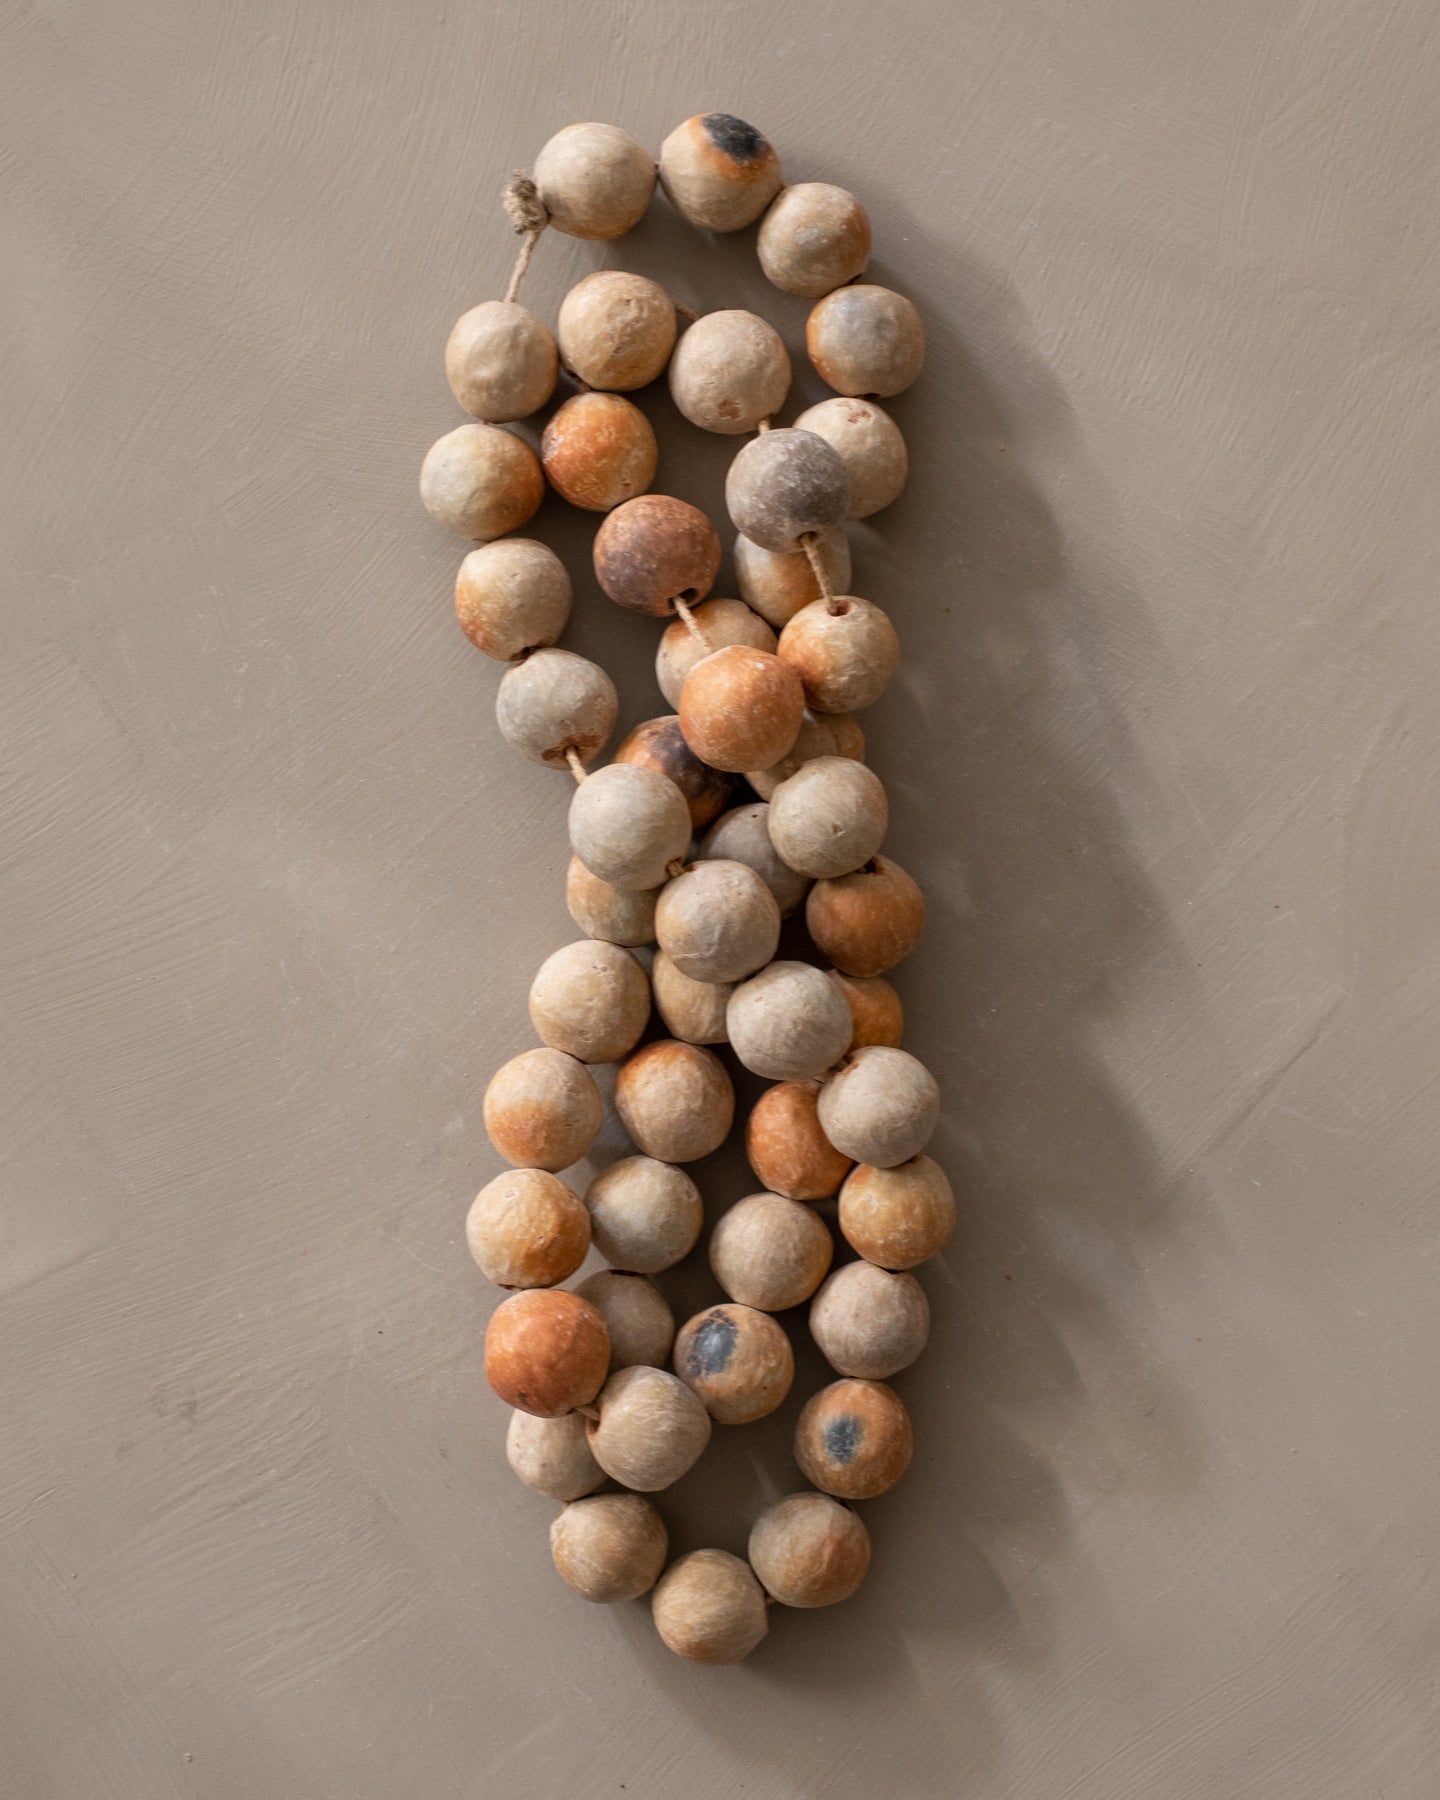 Reannag Teine: Textile weights and Ceramic Beads